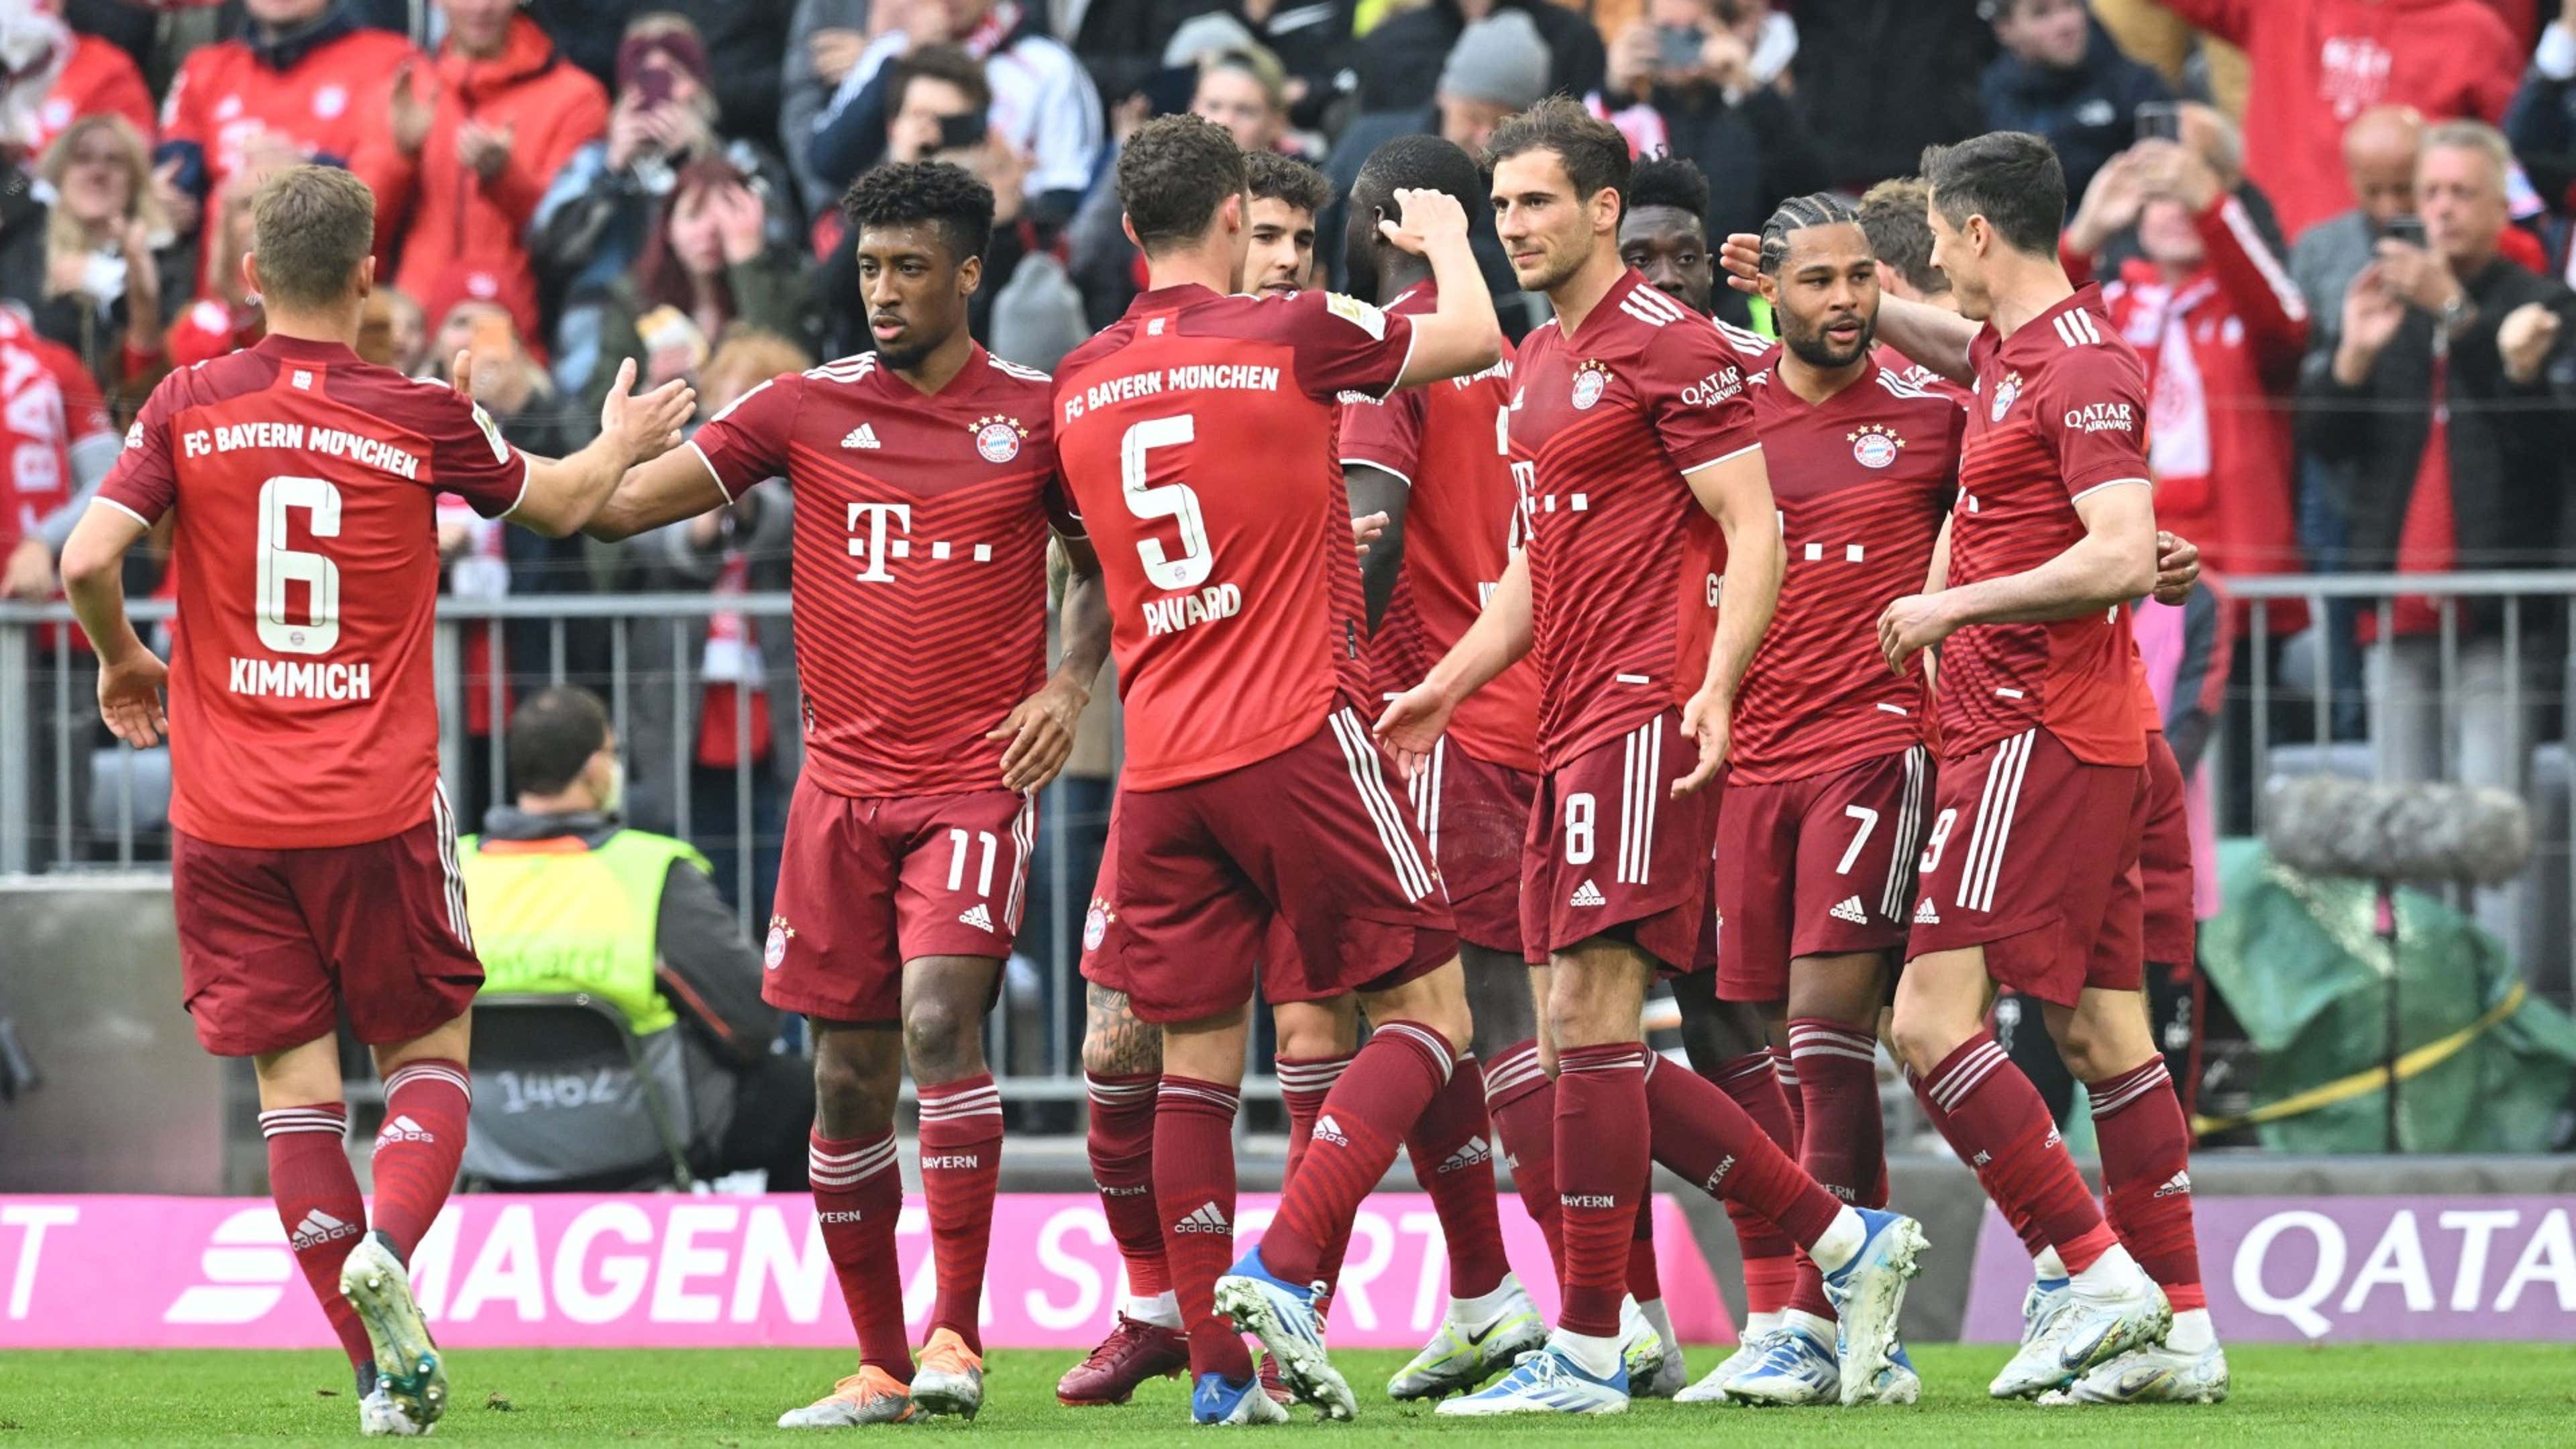 Bayern Munich criticised for team trip Ibiza after 3-1 home defeat by Mainz | Goal.com